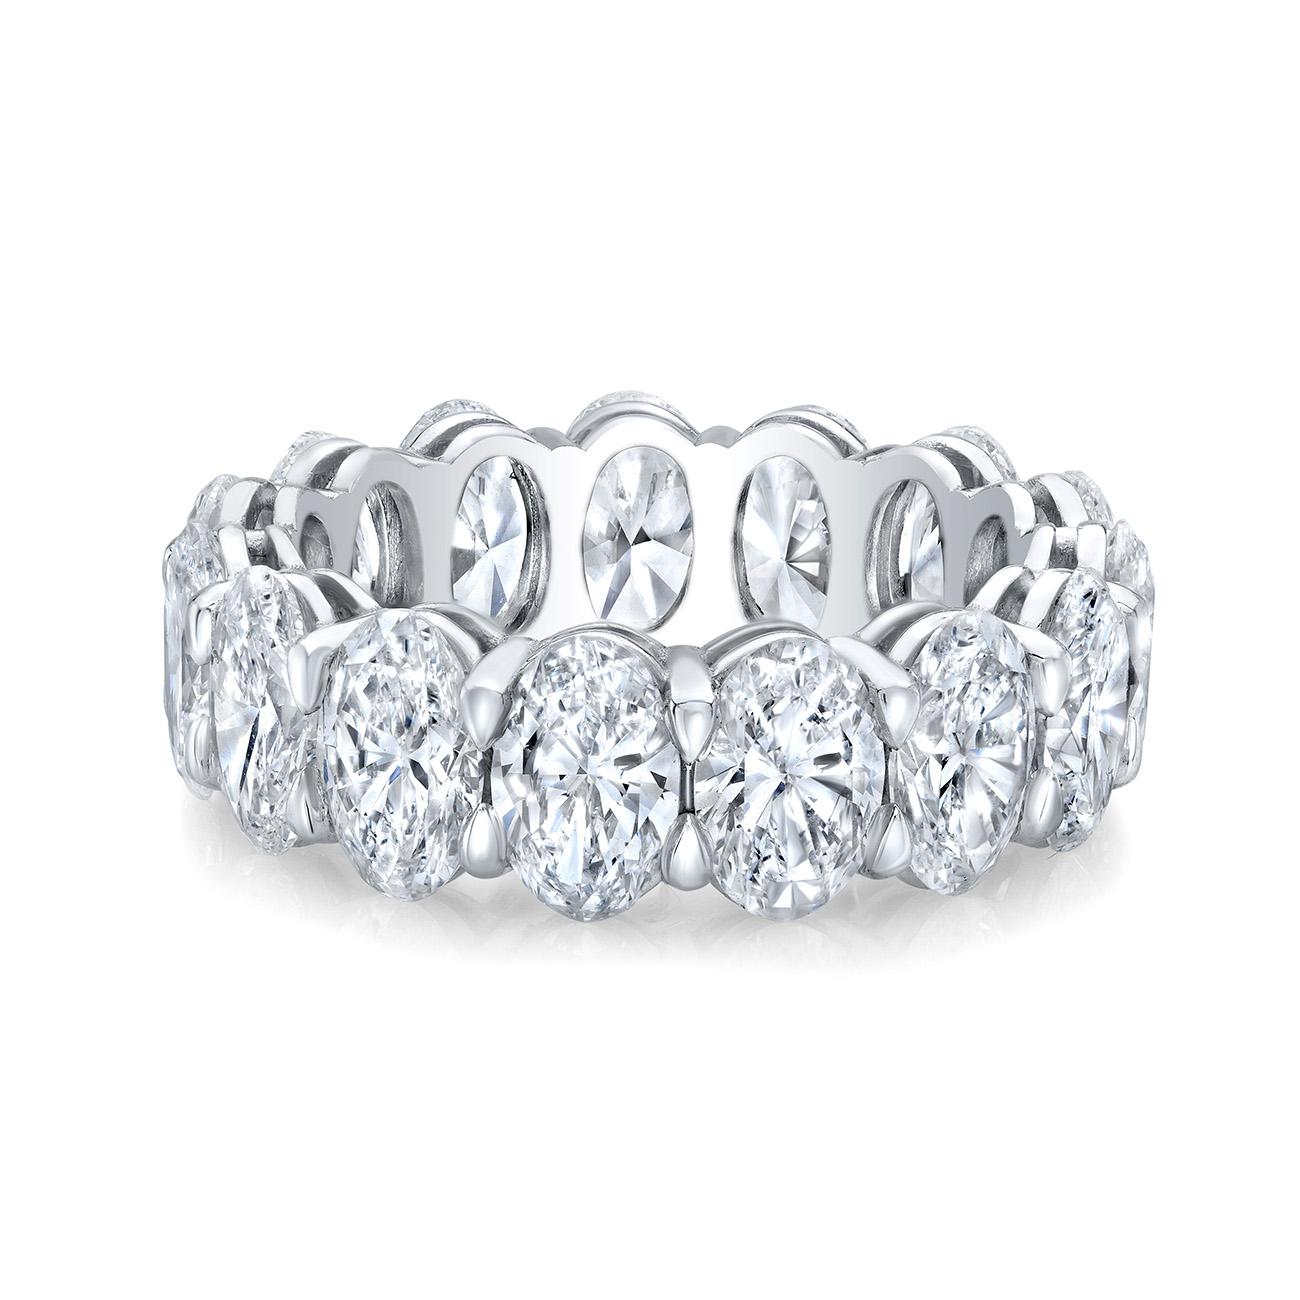 Women's Eternity Band in Platinum with Oval Cut Diamonds. D4.27ct.t.w. For Sale